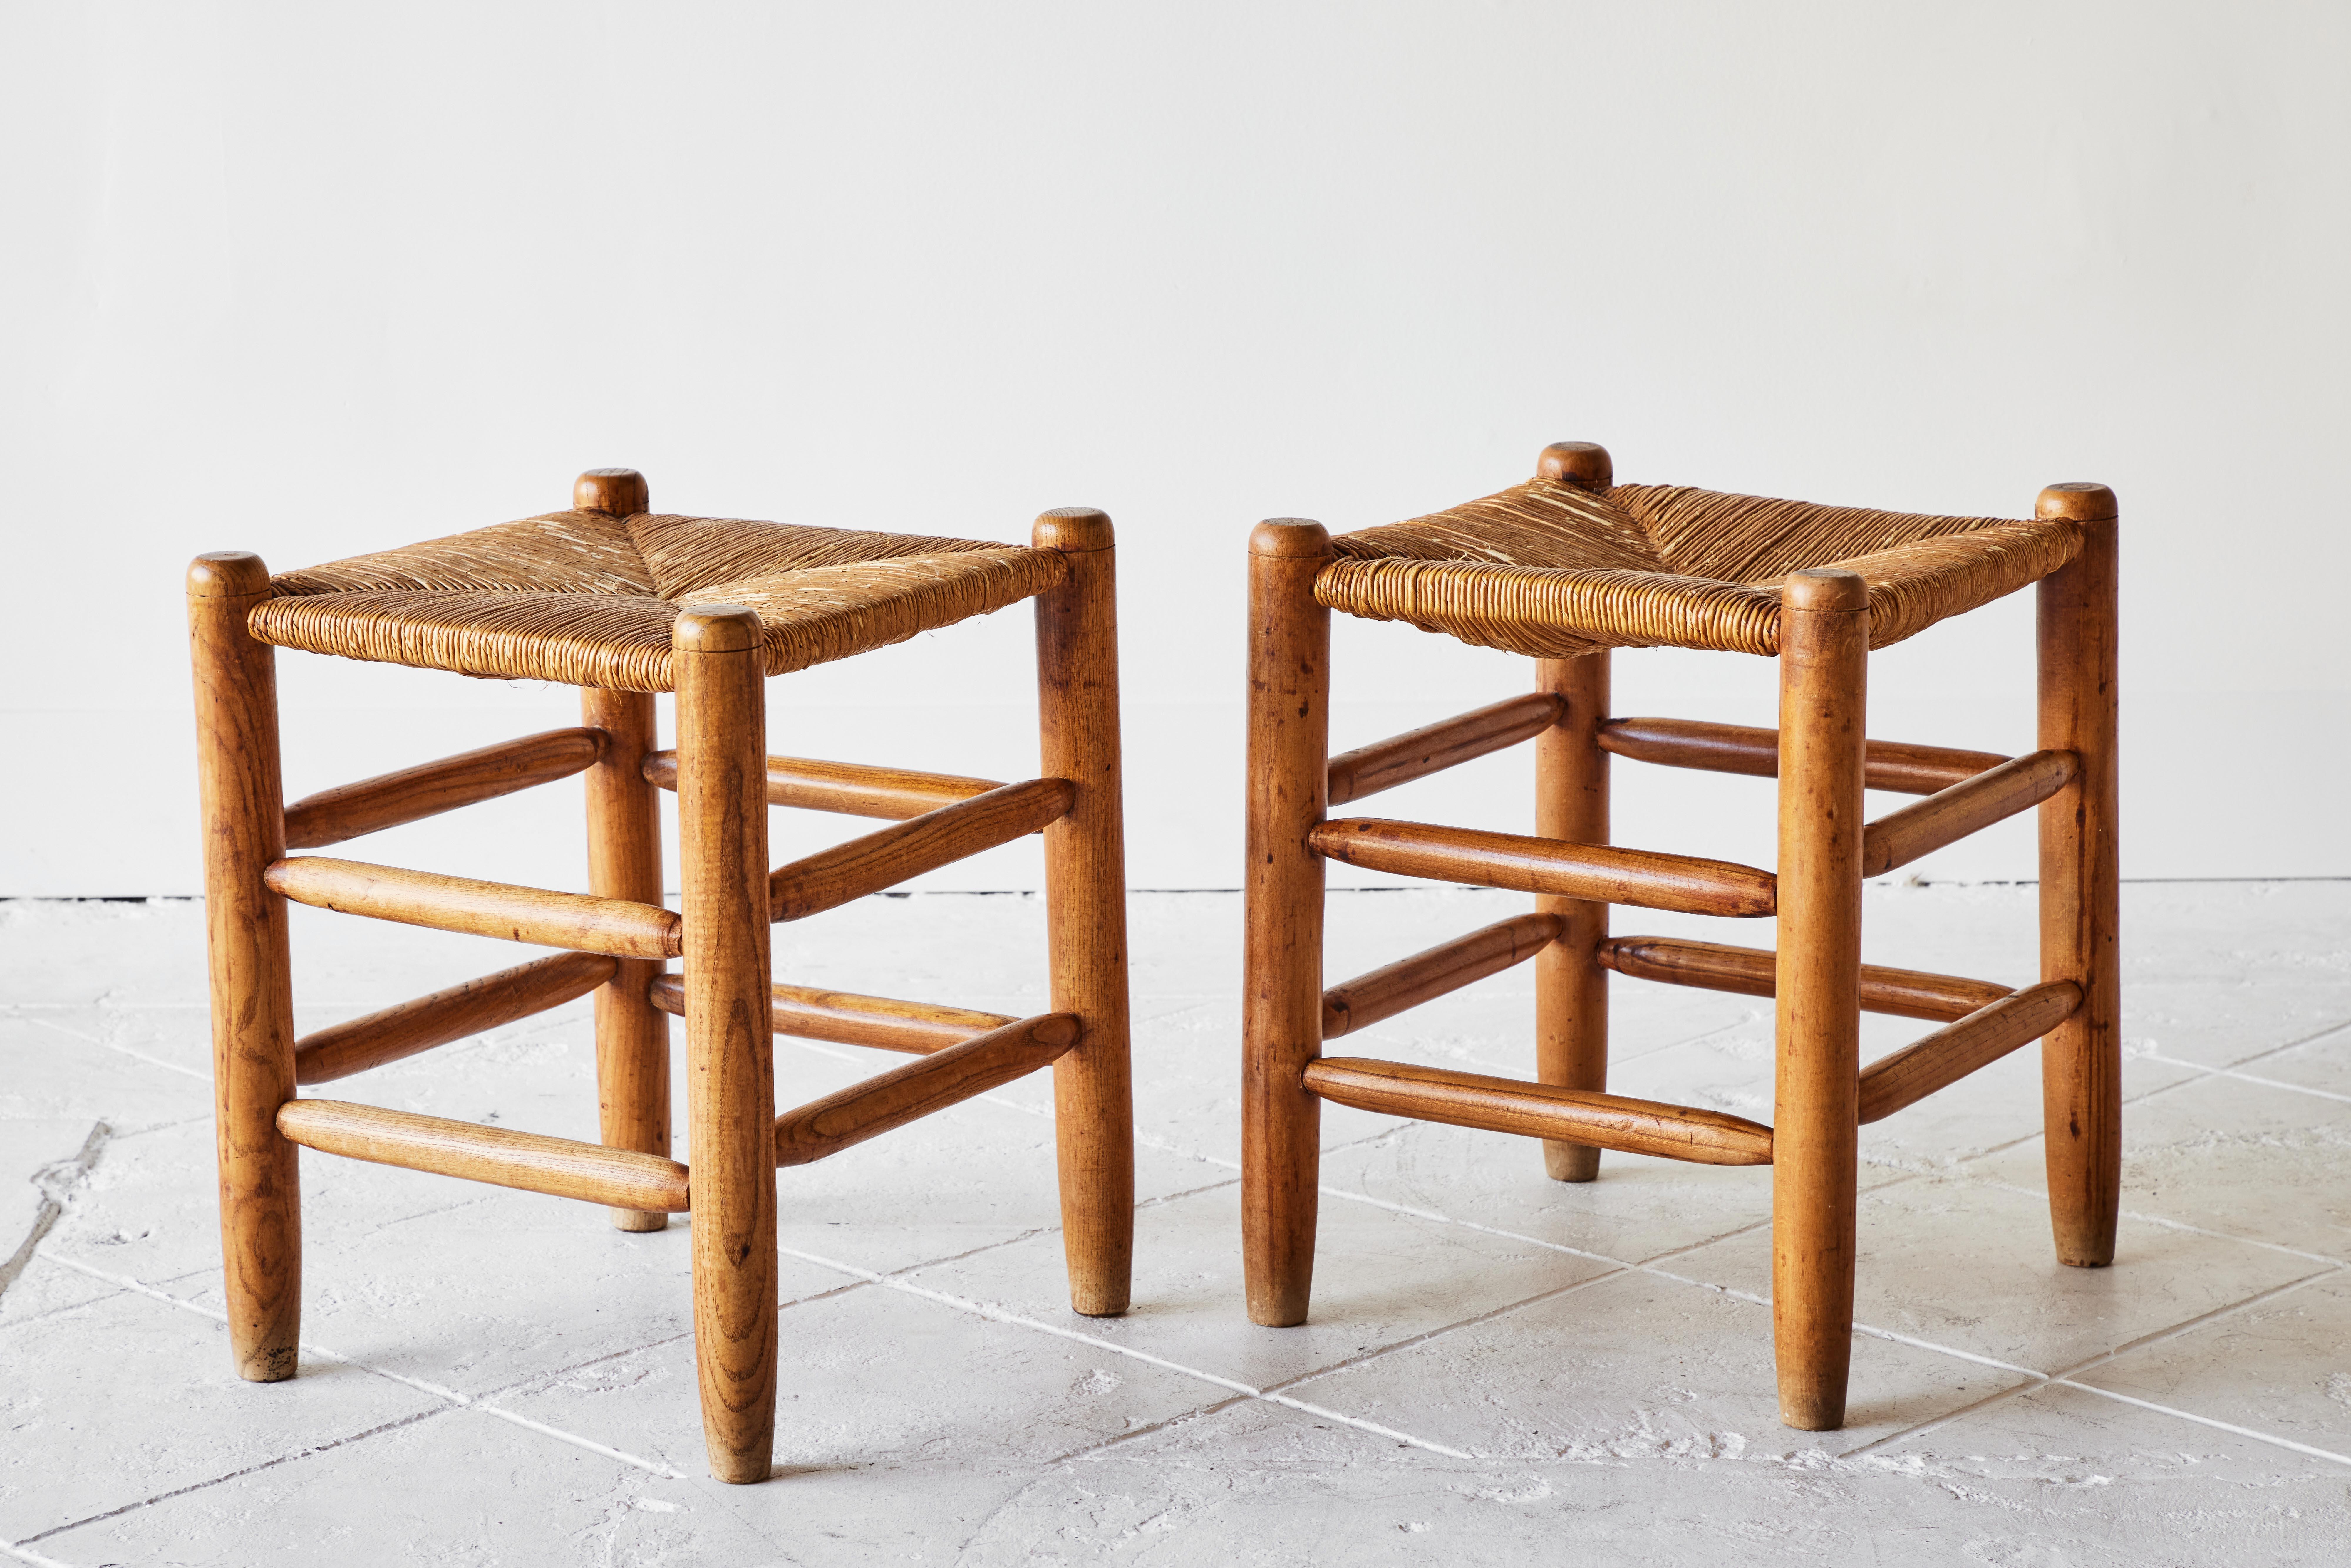 These farmhouse or Provincial style stools are in perfect condition and feature original rush seats and a beautiful patina. The pair of handcrafted early to mid-20th century stools are the ideal organic styled touch to any room.